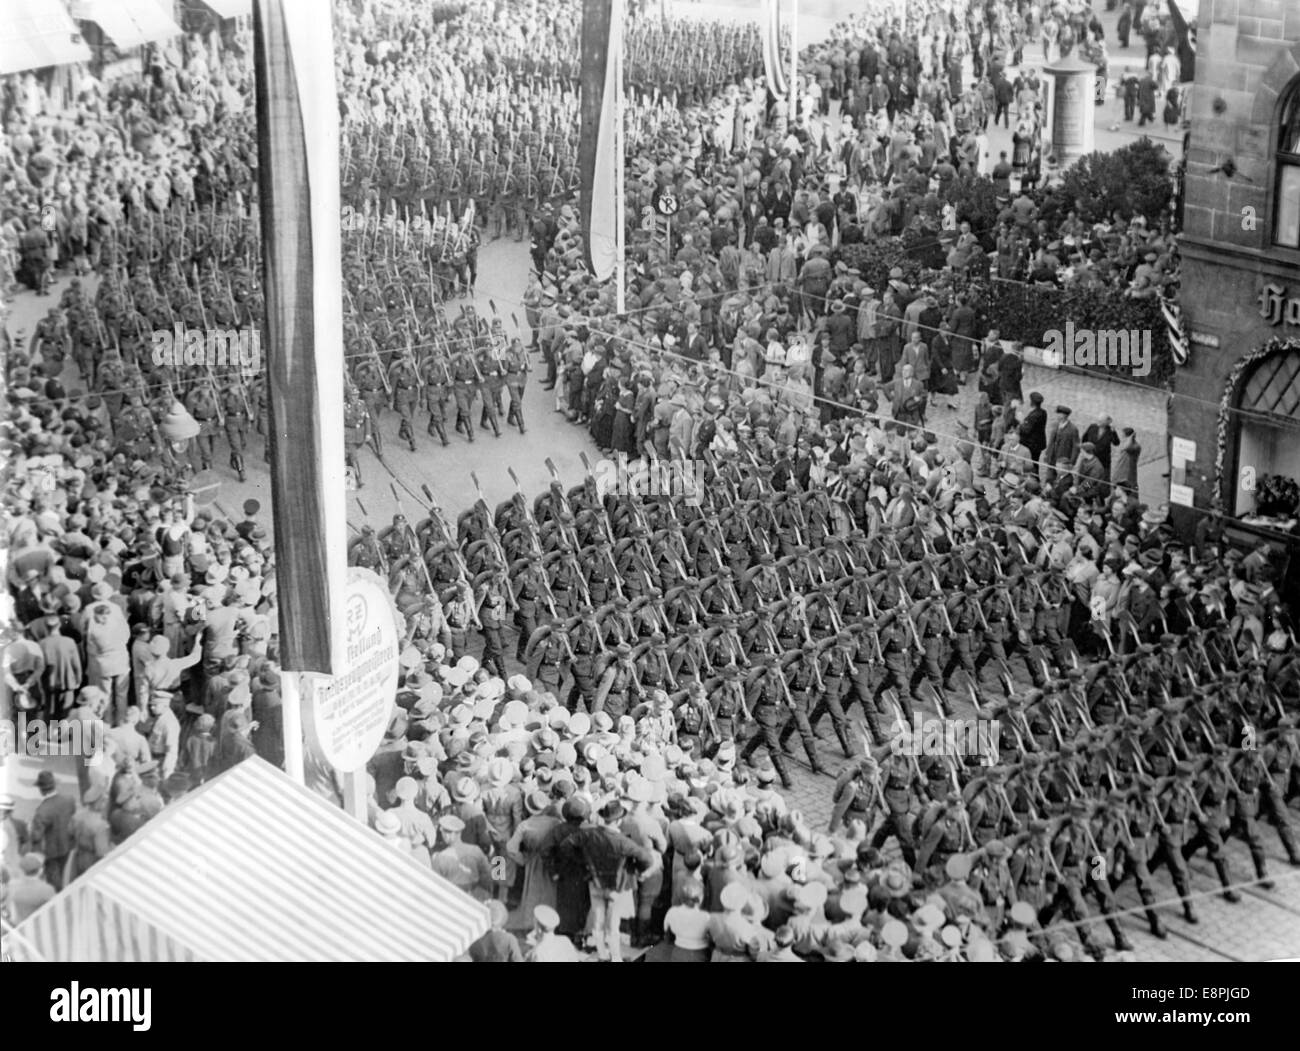 Nuremberg Rally 1937 in Nuremberg, Germany - Members of the Reich Labour Service (RAD) march through the streets of the city with rucksacks and spades. Fotoarchiv für Zeitgeschichtee - NO WIRE SERVICE - Stock Photo